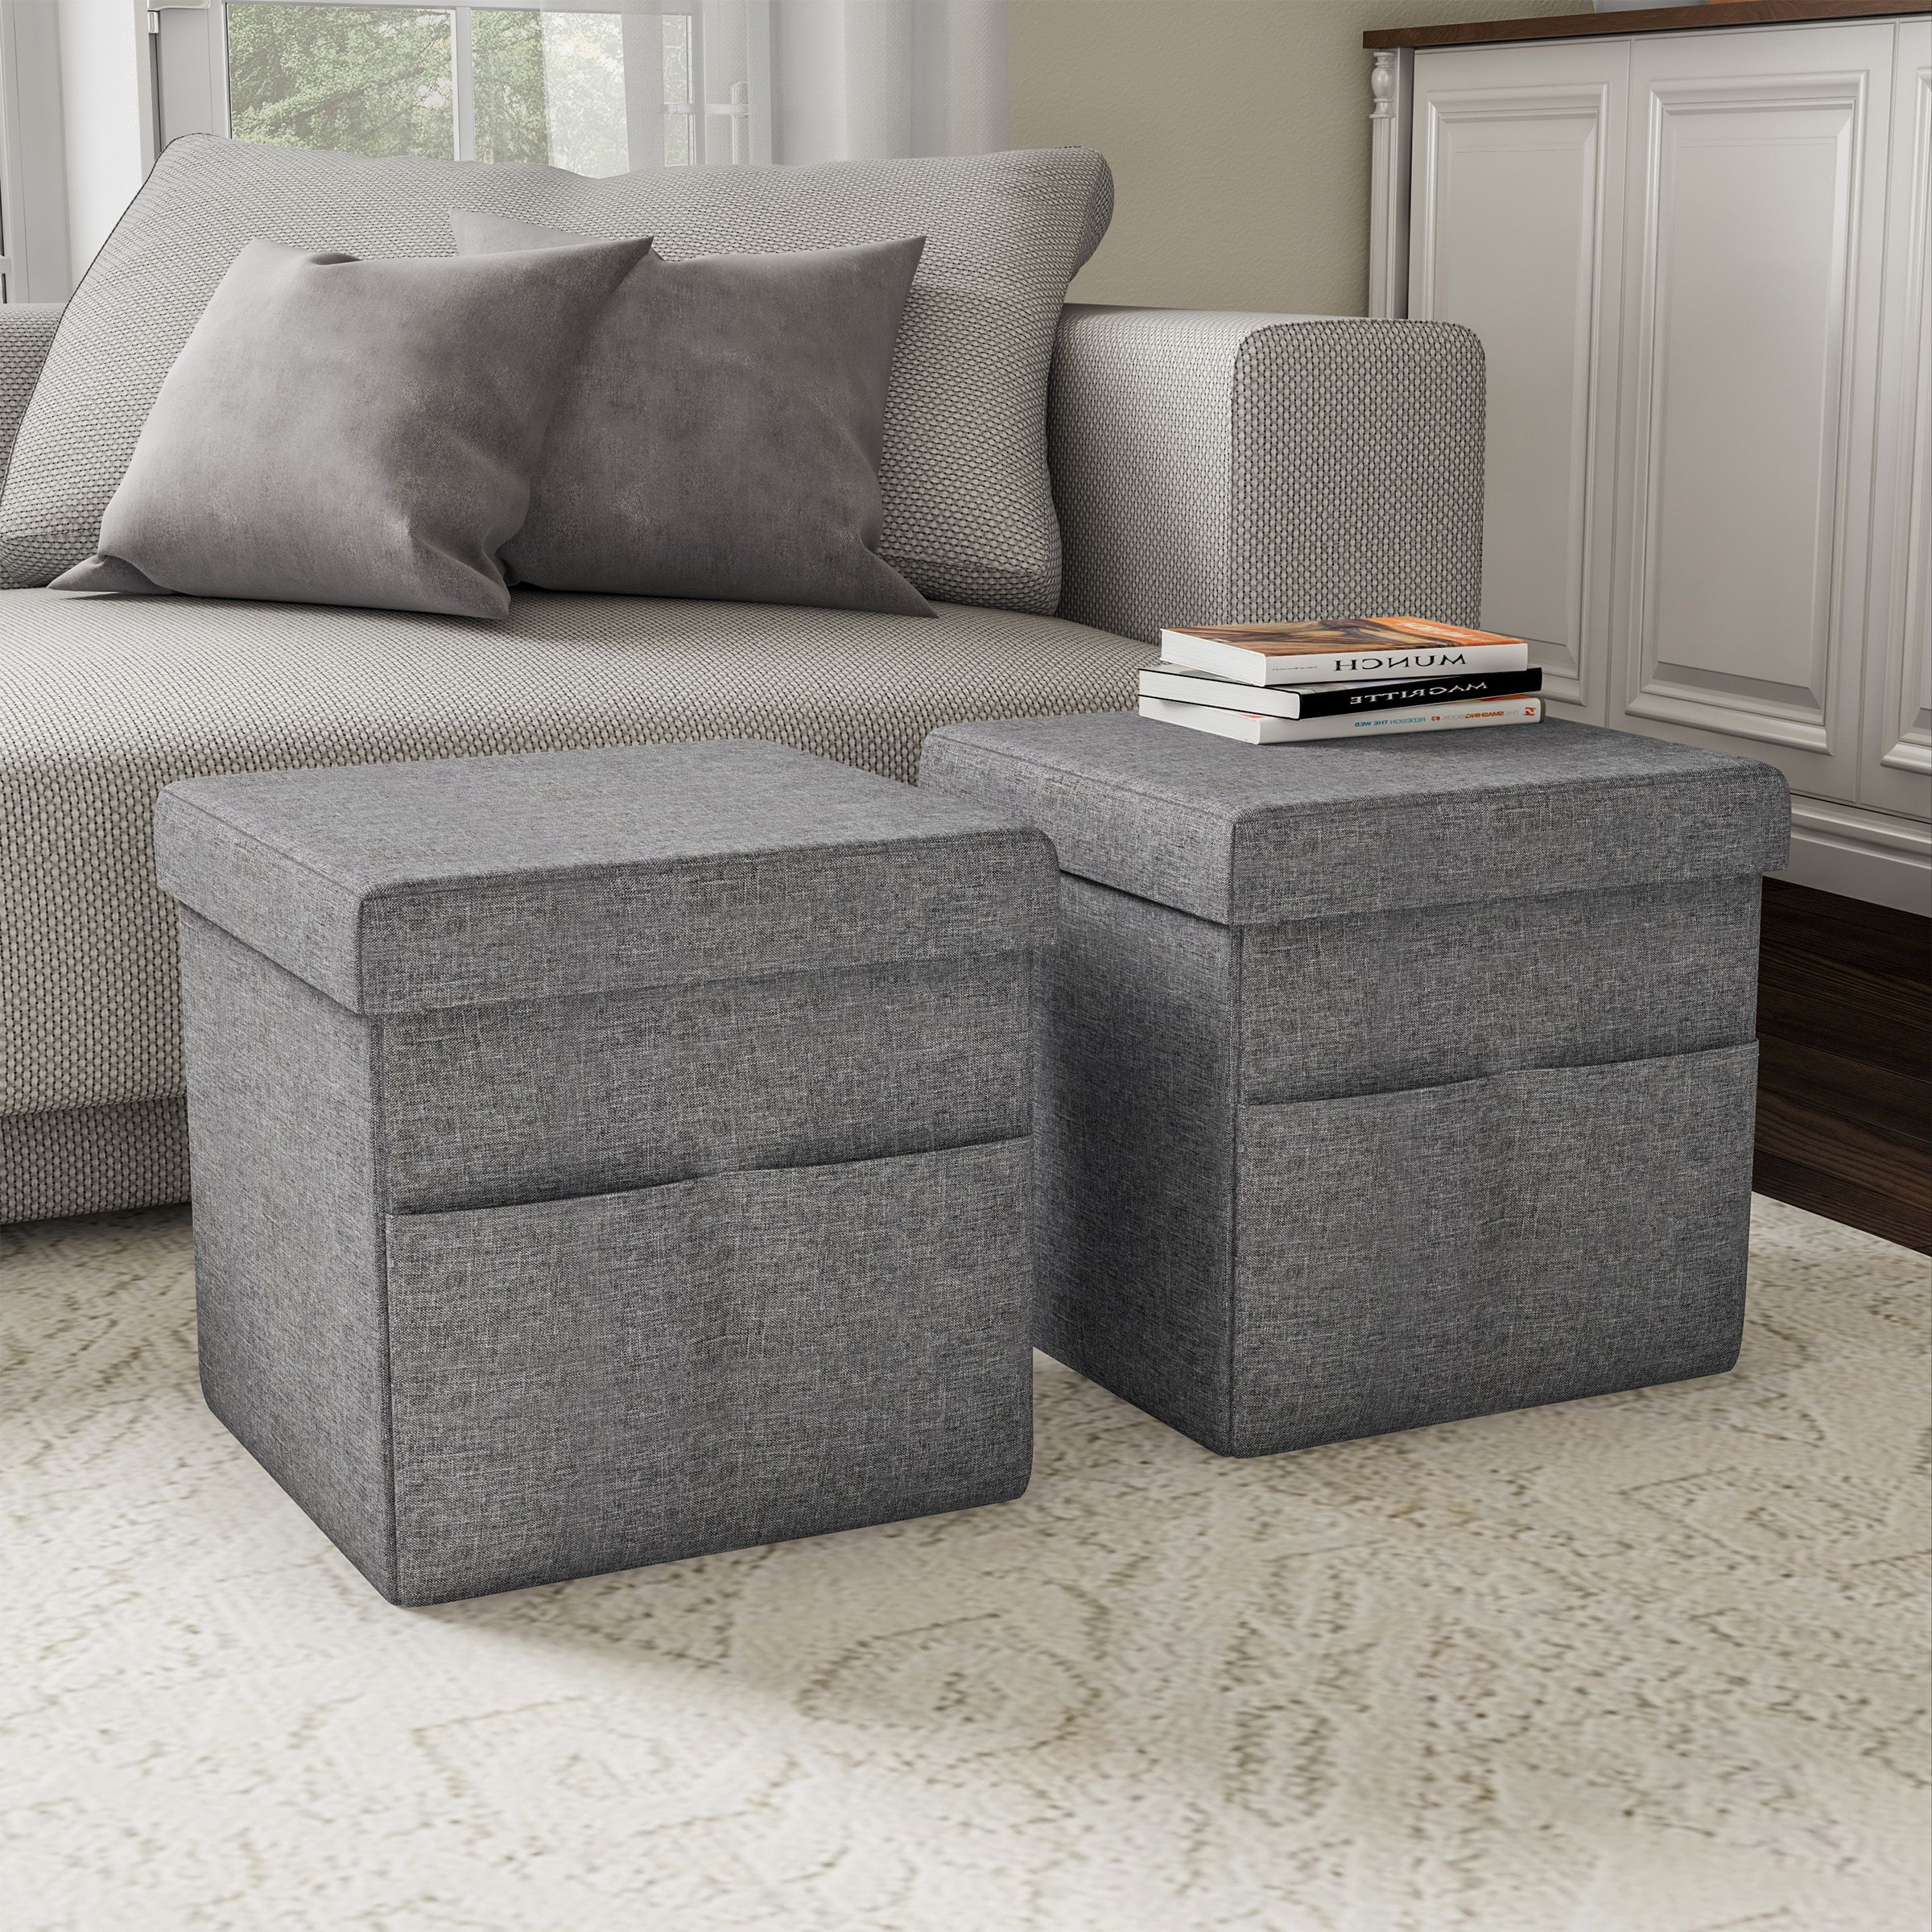 Square Cube Ottomans Inside Popular Foldable Storage Cube Ottoman With Pockets (pair, Charcoal Gray (View 1 of 10)